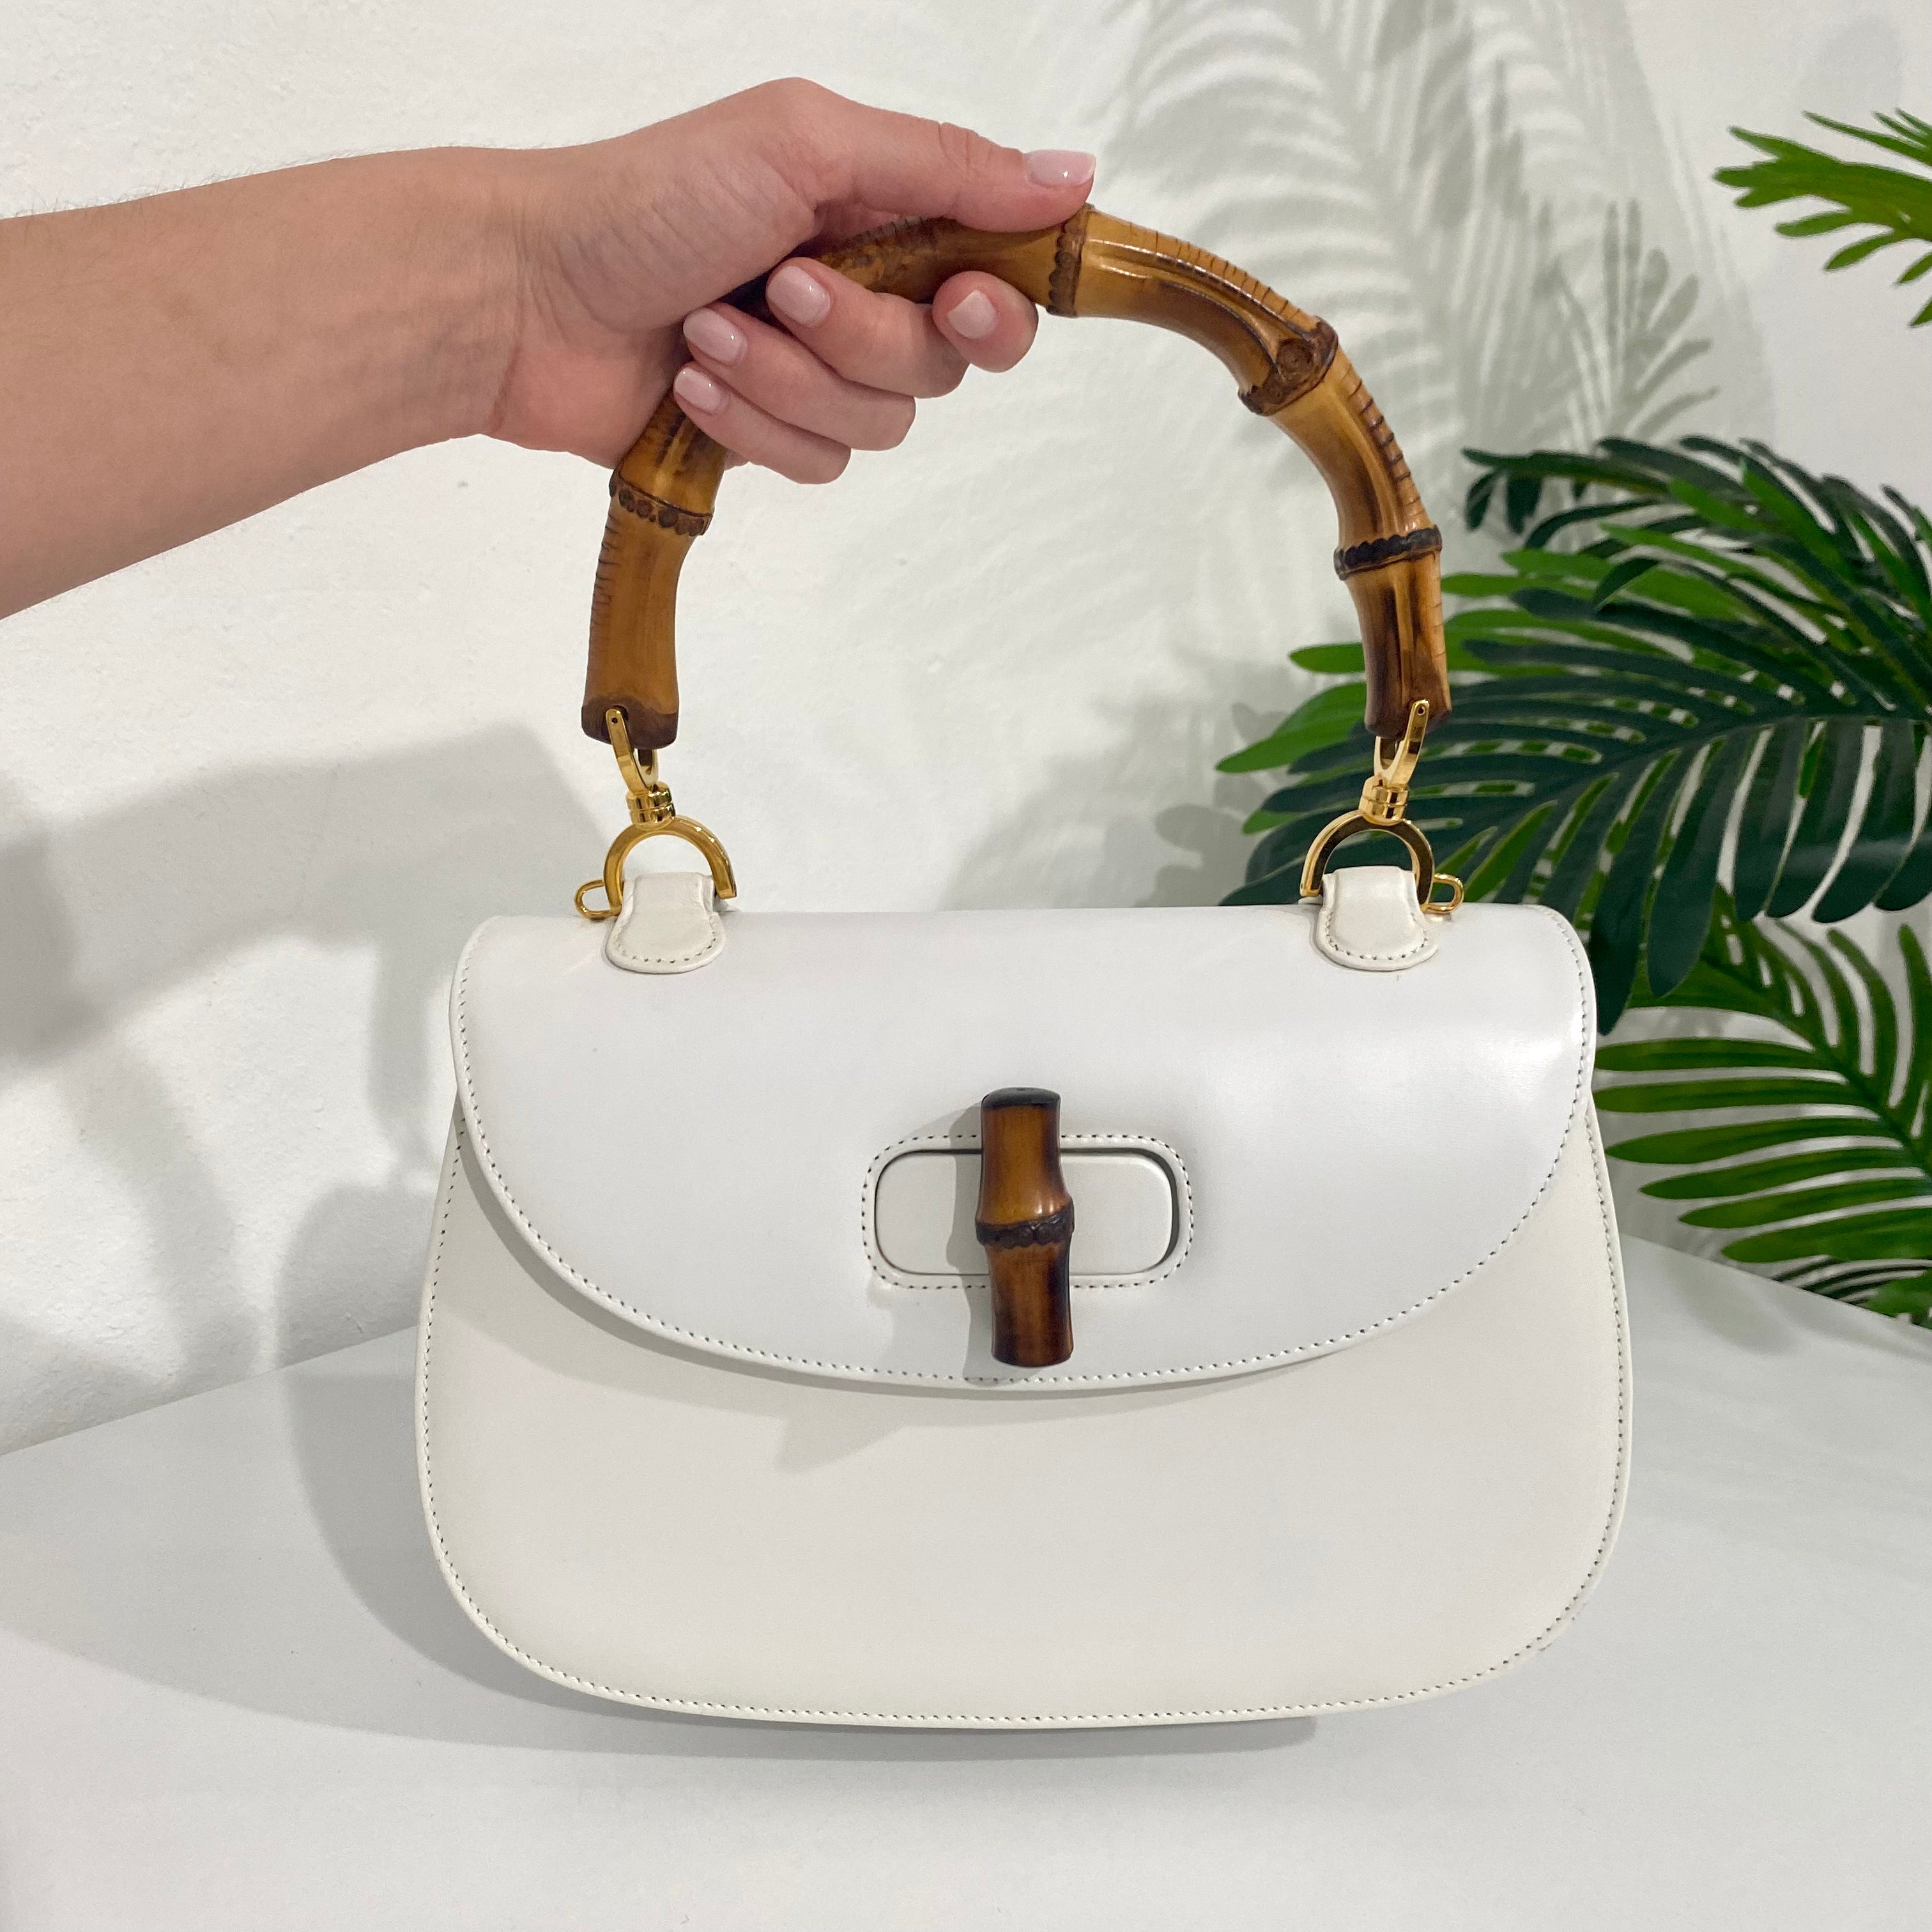 New Gucci White Leather w/Bamboo Handles Women's Purse "